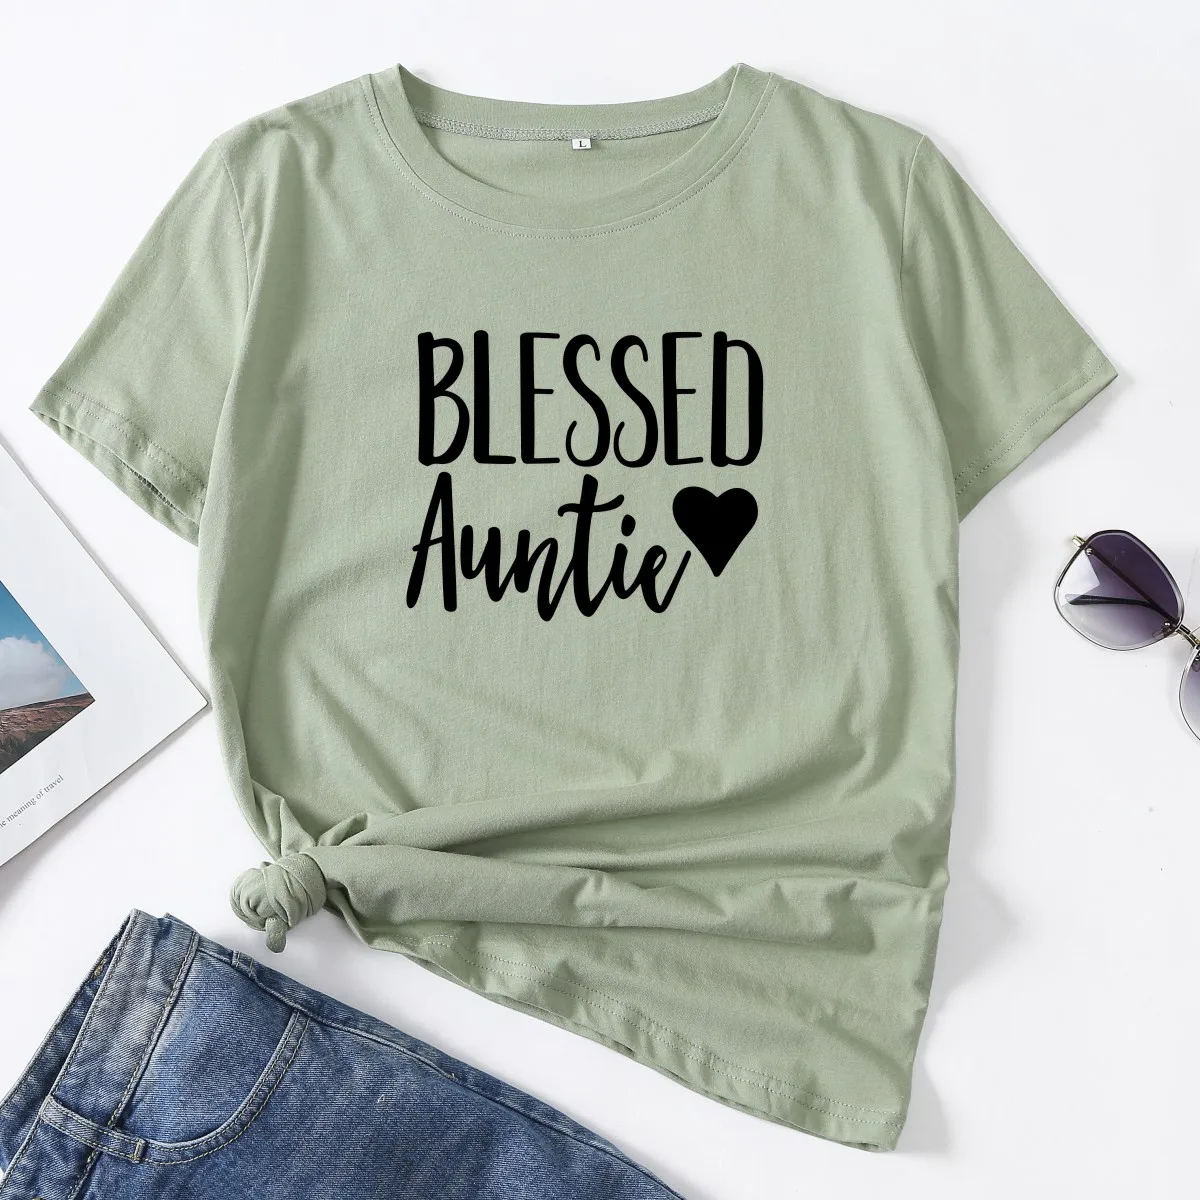 

Blessed Auntie Heart Aunt Top Graphic Tee Woman T-Shirt Short Sleeve T-Shirts Summer Tops for WomenCotton Female Shirt Clothes